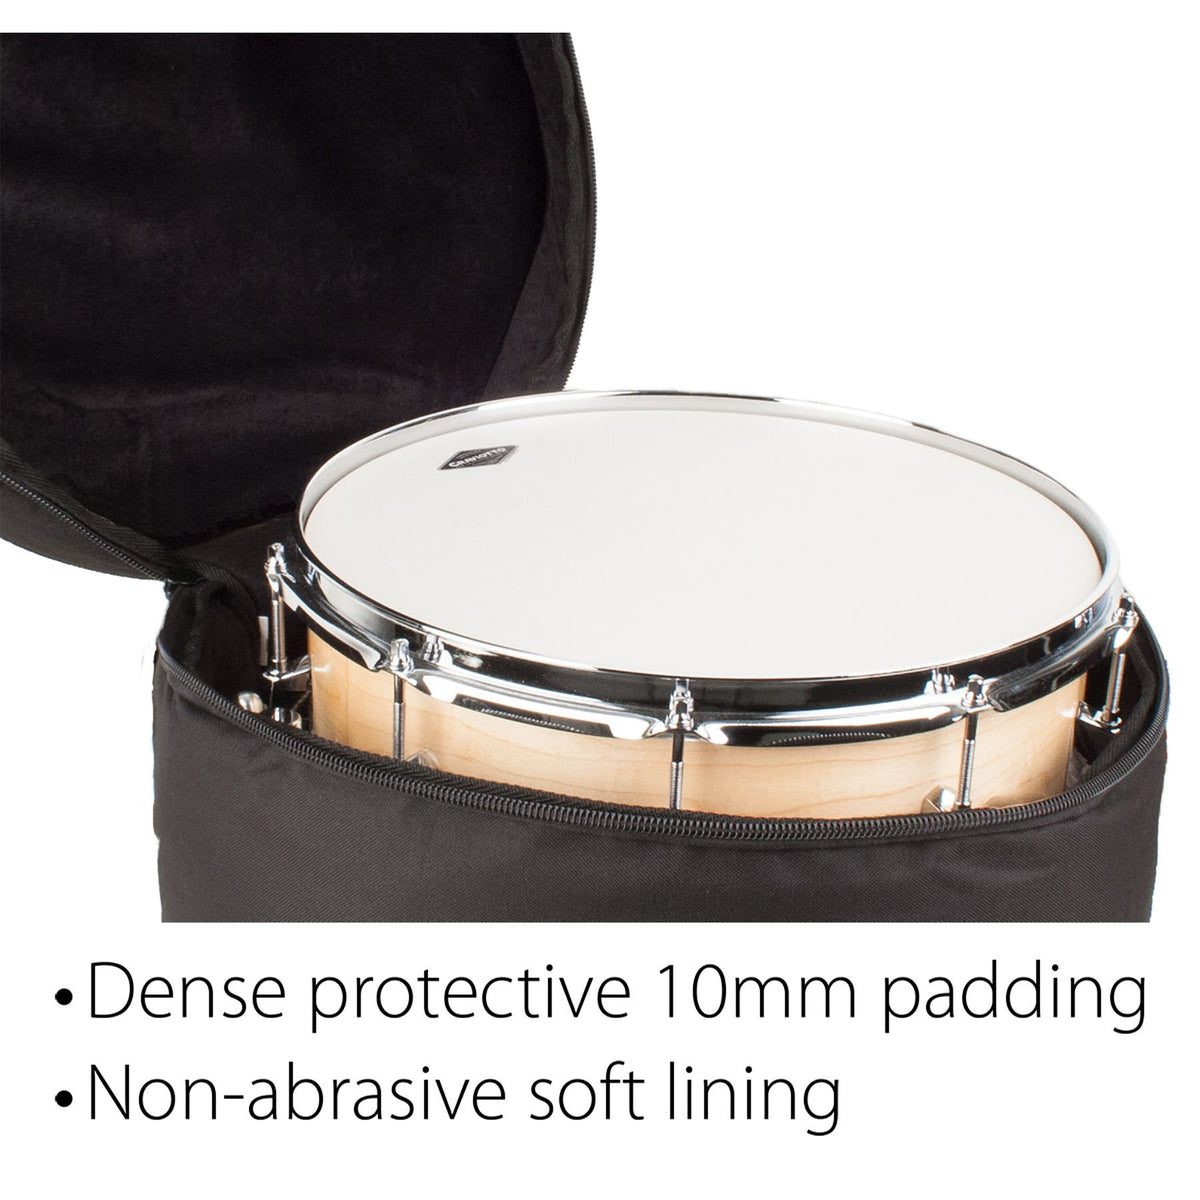 Protec - Padded Tom Bag 16â€³ X 16â€³ (Heavy Ready Series)-Percussion-Protec-Music Elements